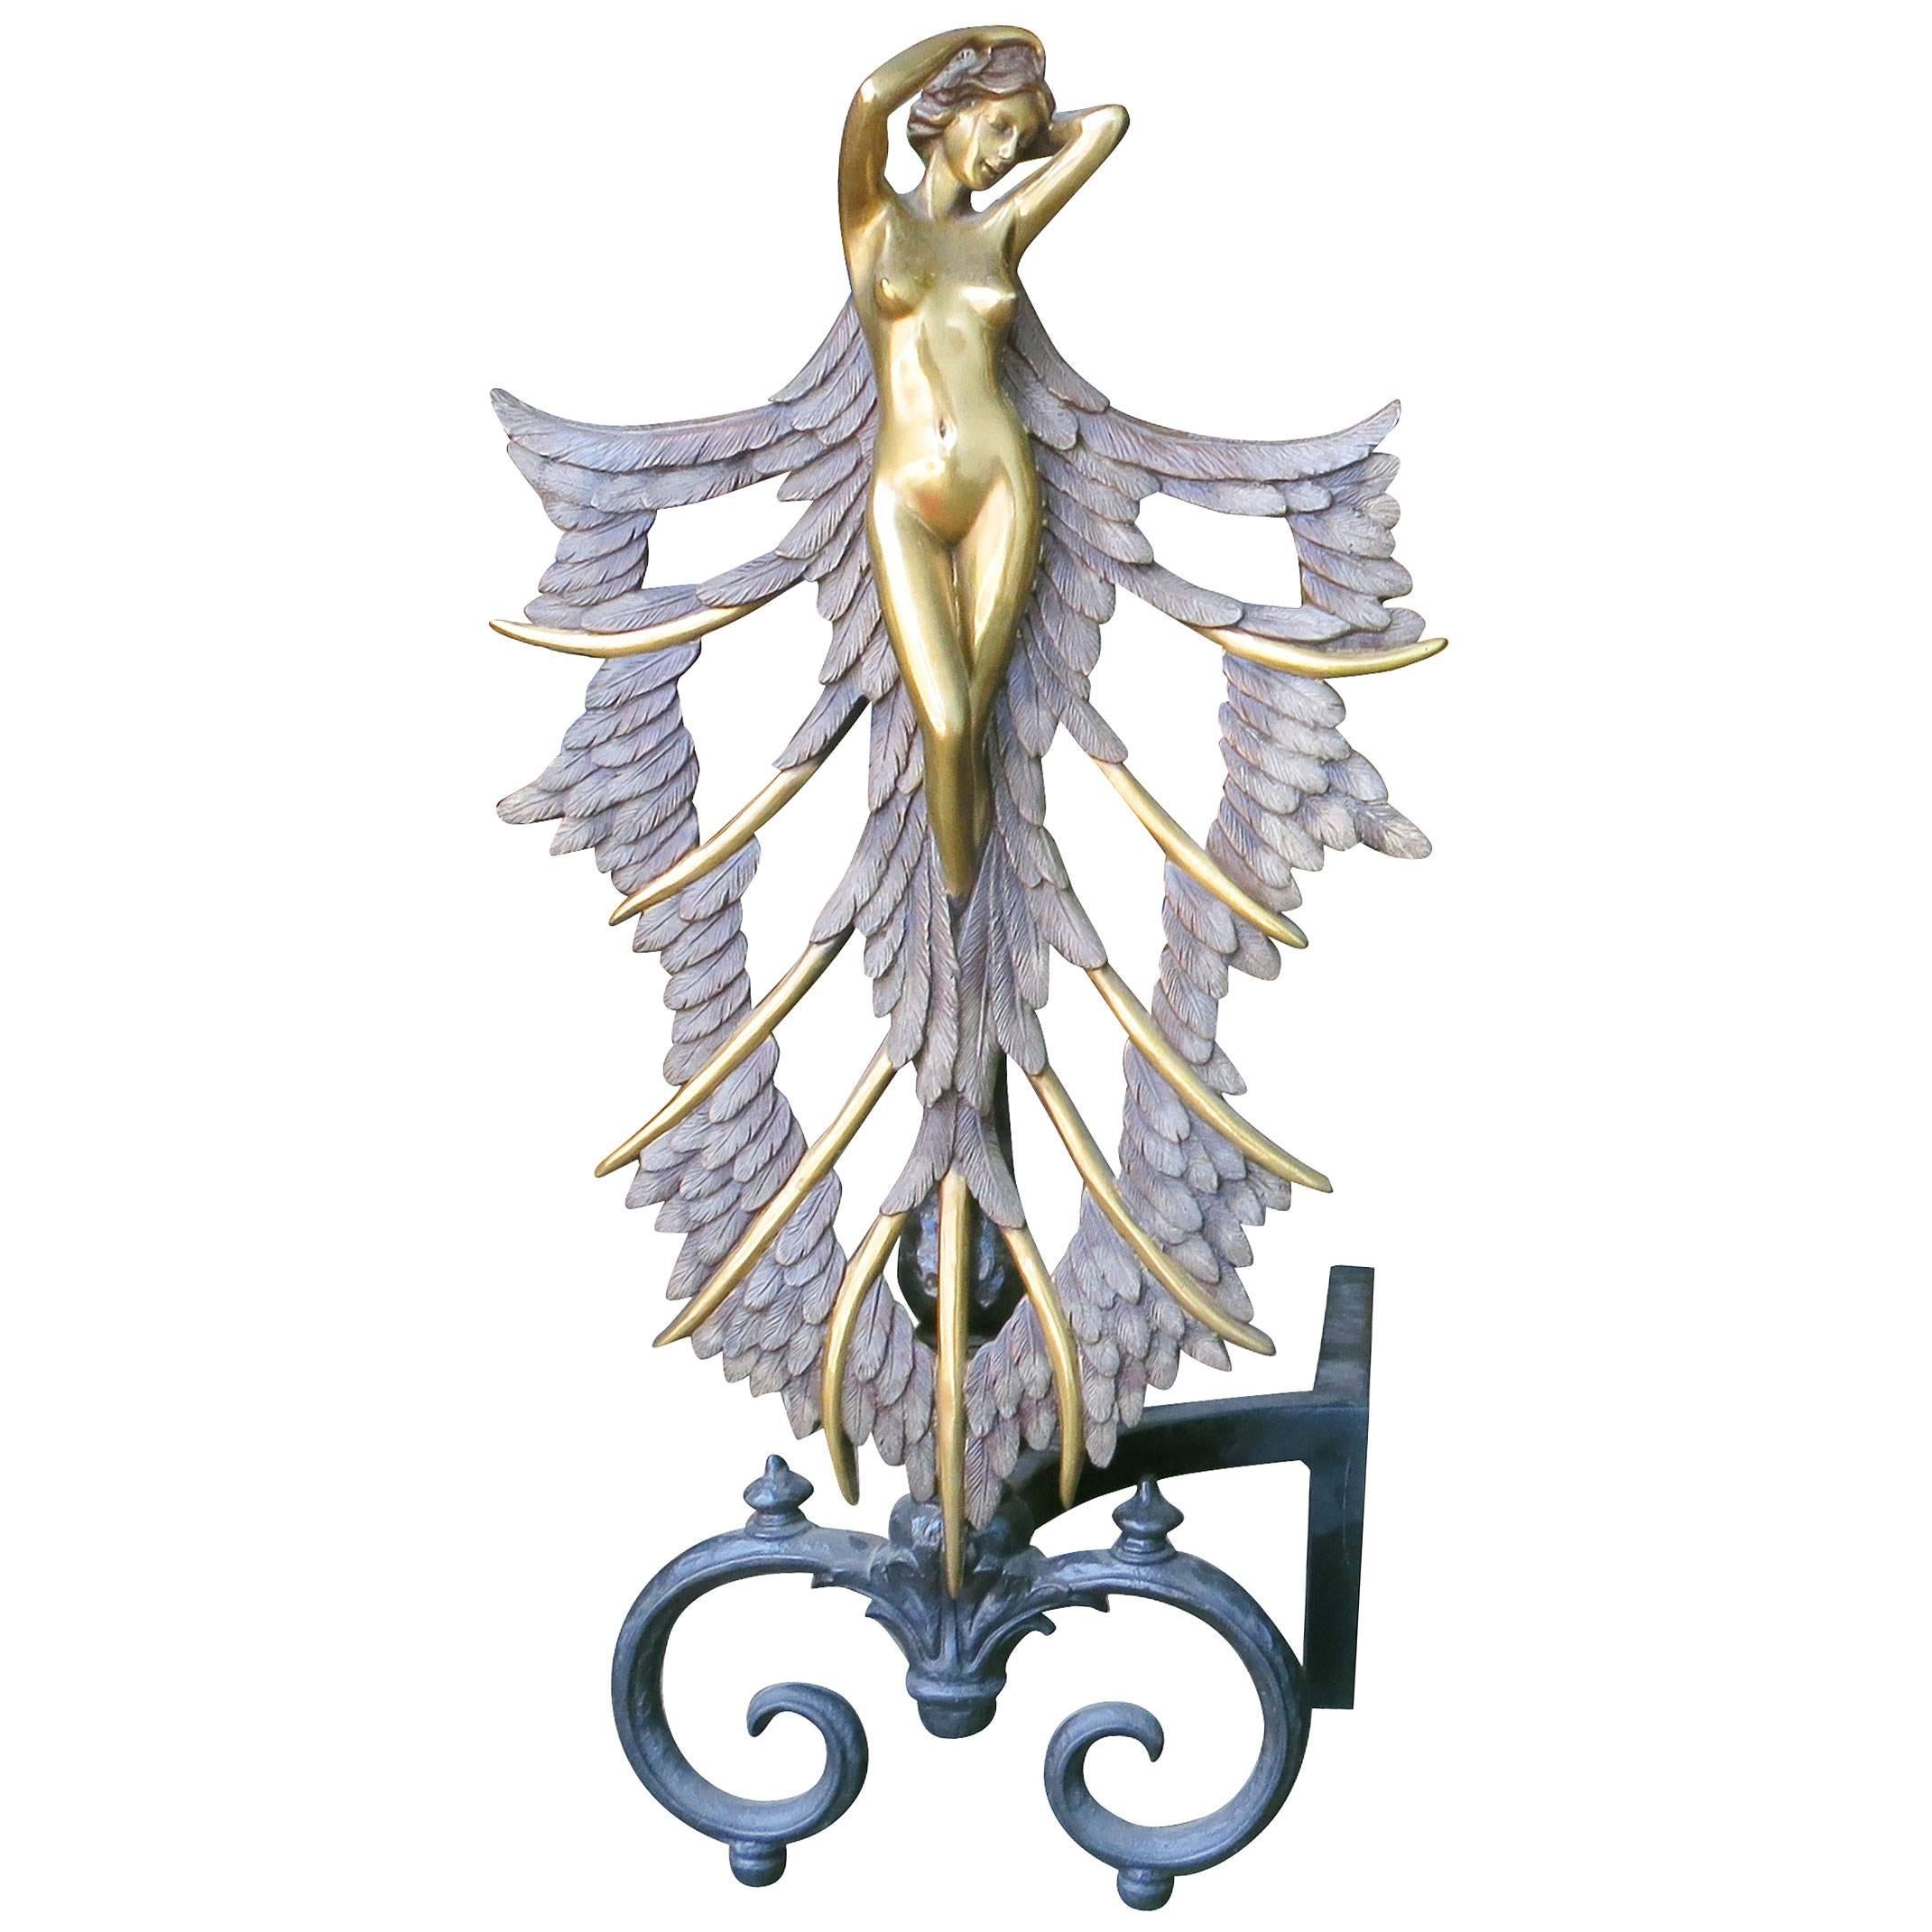 French Art Deco style high polished bronze andiron set with a Nude female flapper emerges from an ormolu feather design sitting on top of a scrolling base. 

Product handcrafted in the USA with the highest quality materials and over 30 years of